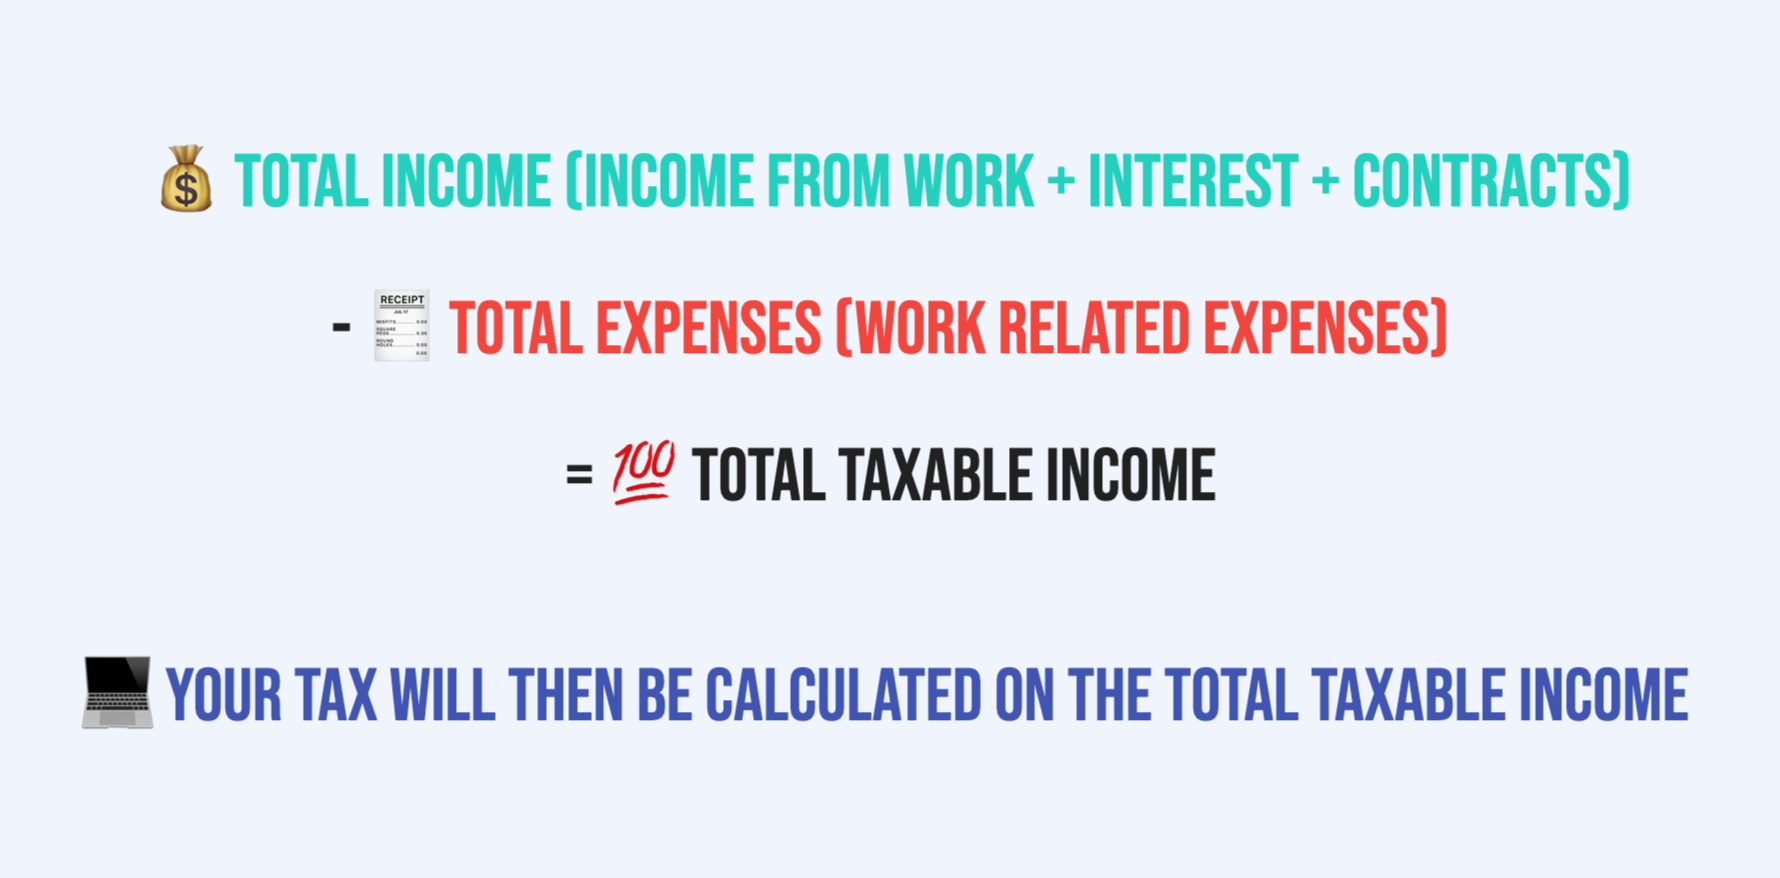 How to calculate your taxes in Australia as an international student